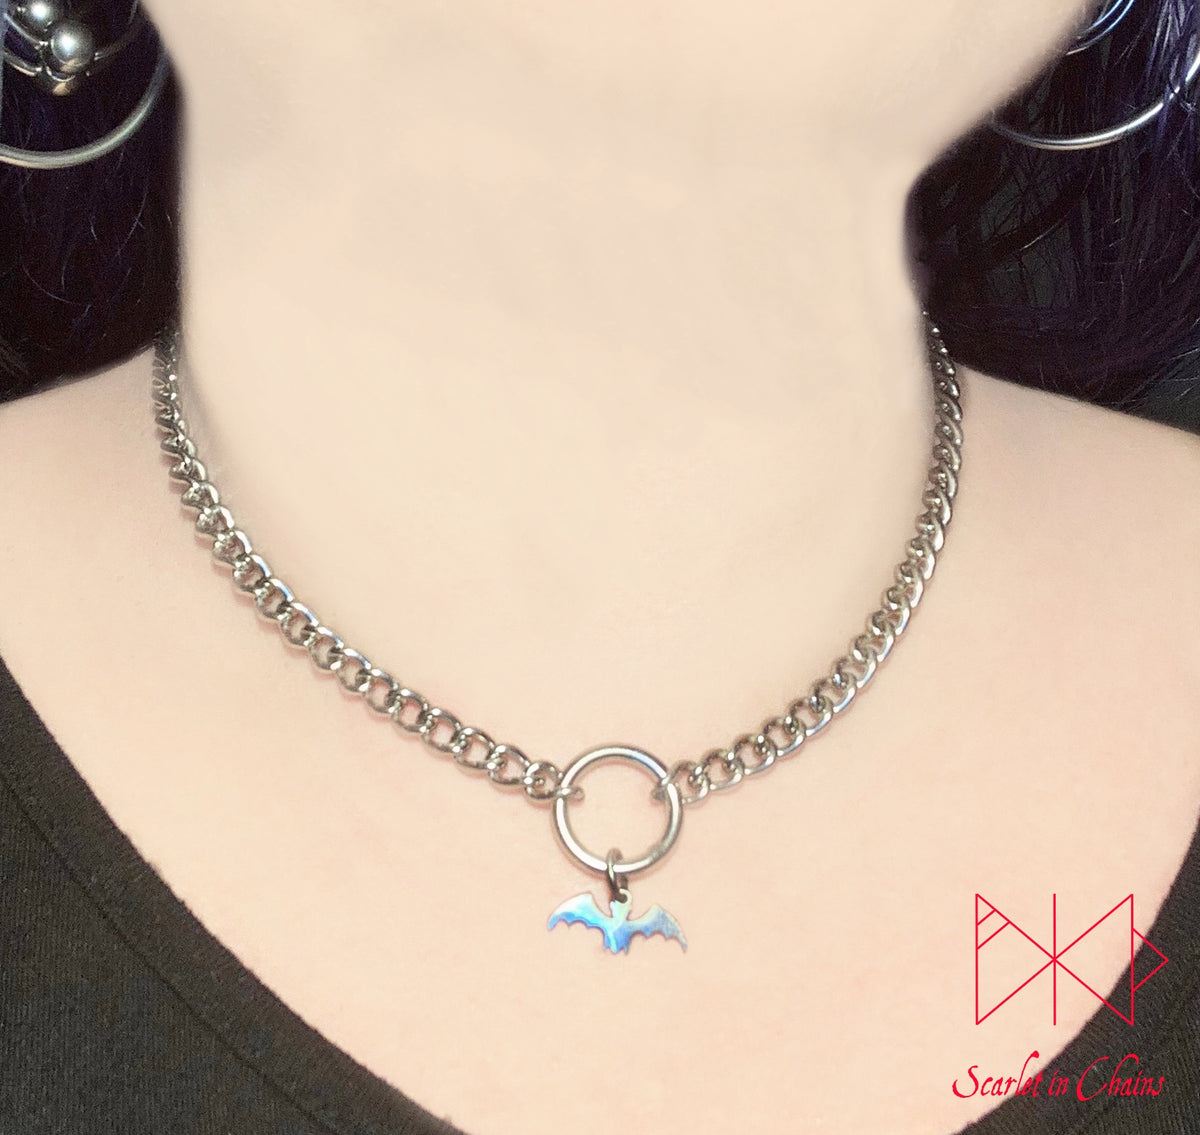 Stainless Steel Bat Choker – Scarlet in Chains